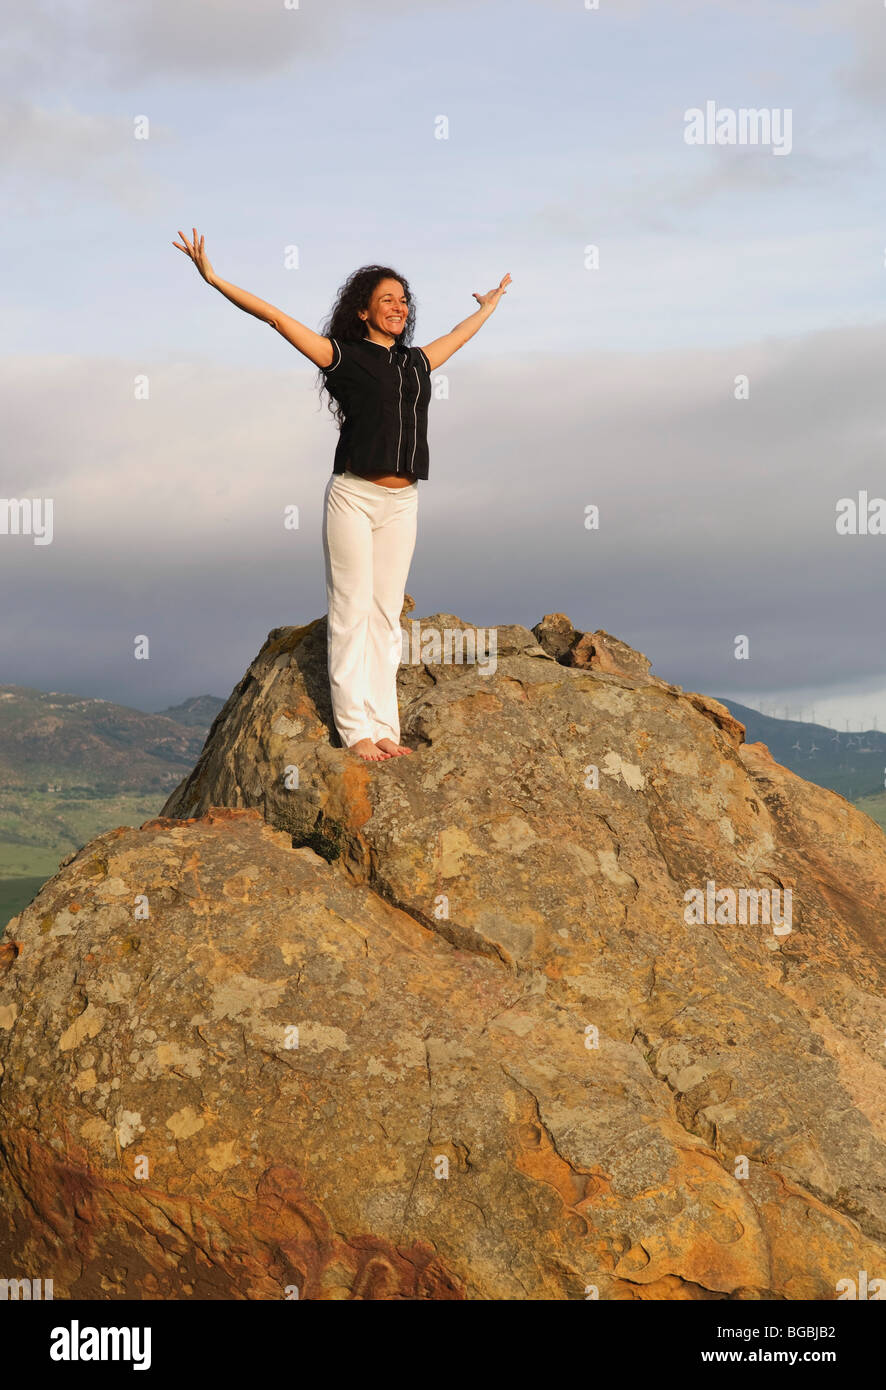 Woman on mountain peak with arms raised Banque D'Images